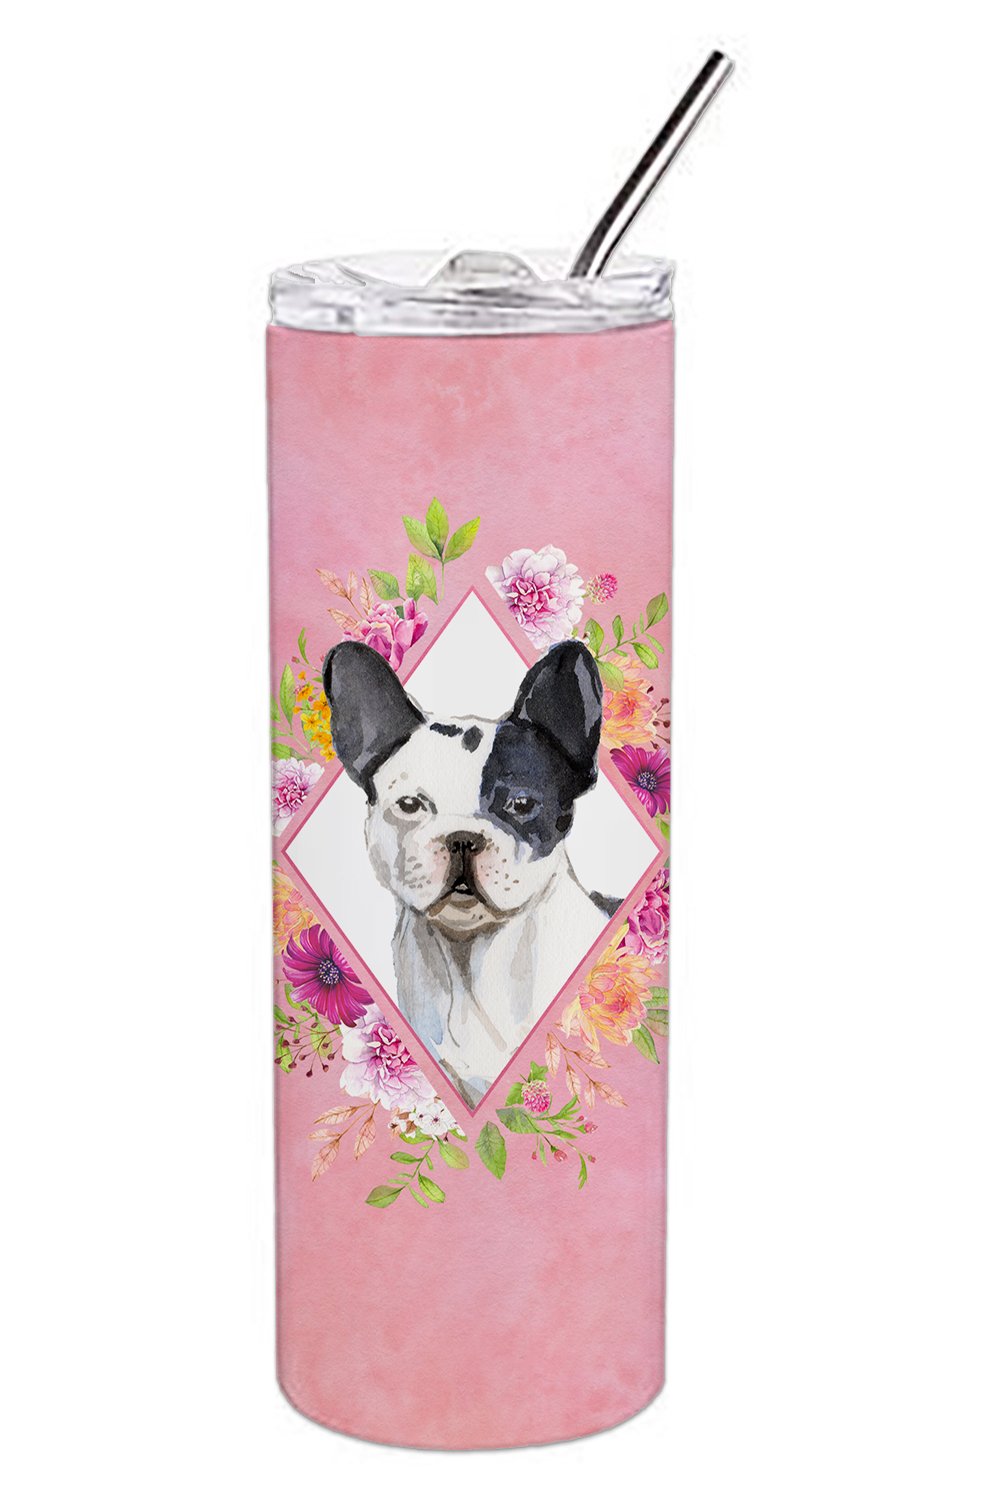 Black and White Frenchie Pink Flowers Double Walled Stainless Steel 20 oz Skinny Tumbler CK4260TBL20 by Caroline's Treasures